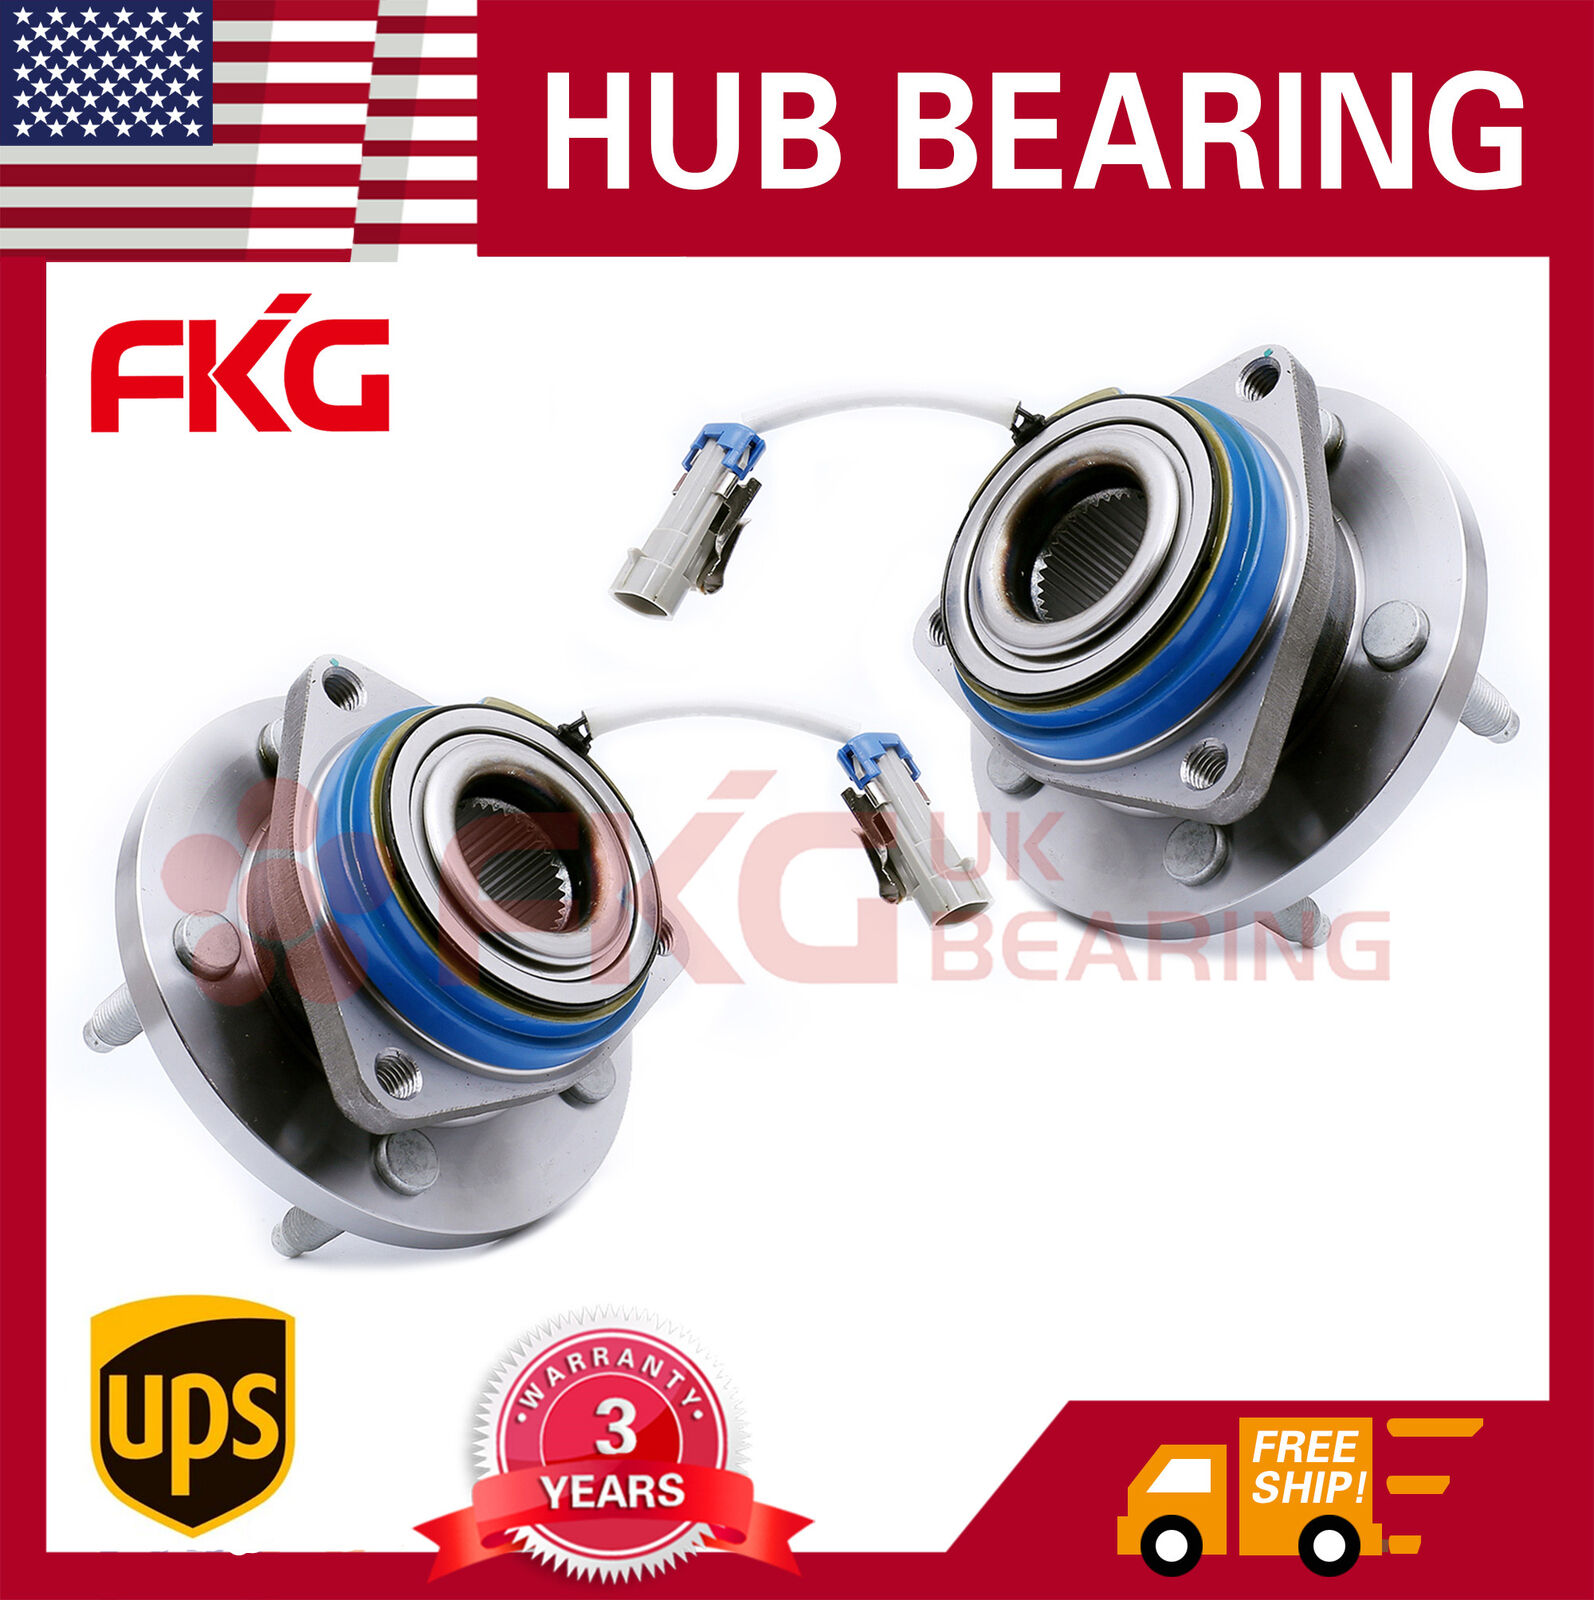 2 Front Wheel Bearing for Pontiac Grand Prix Buick Regal Cadillac Deville 513121